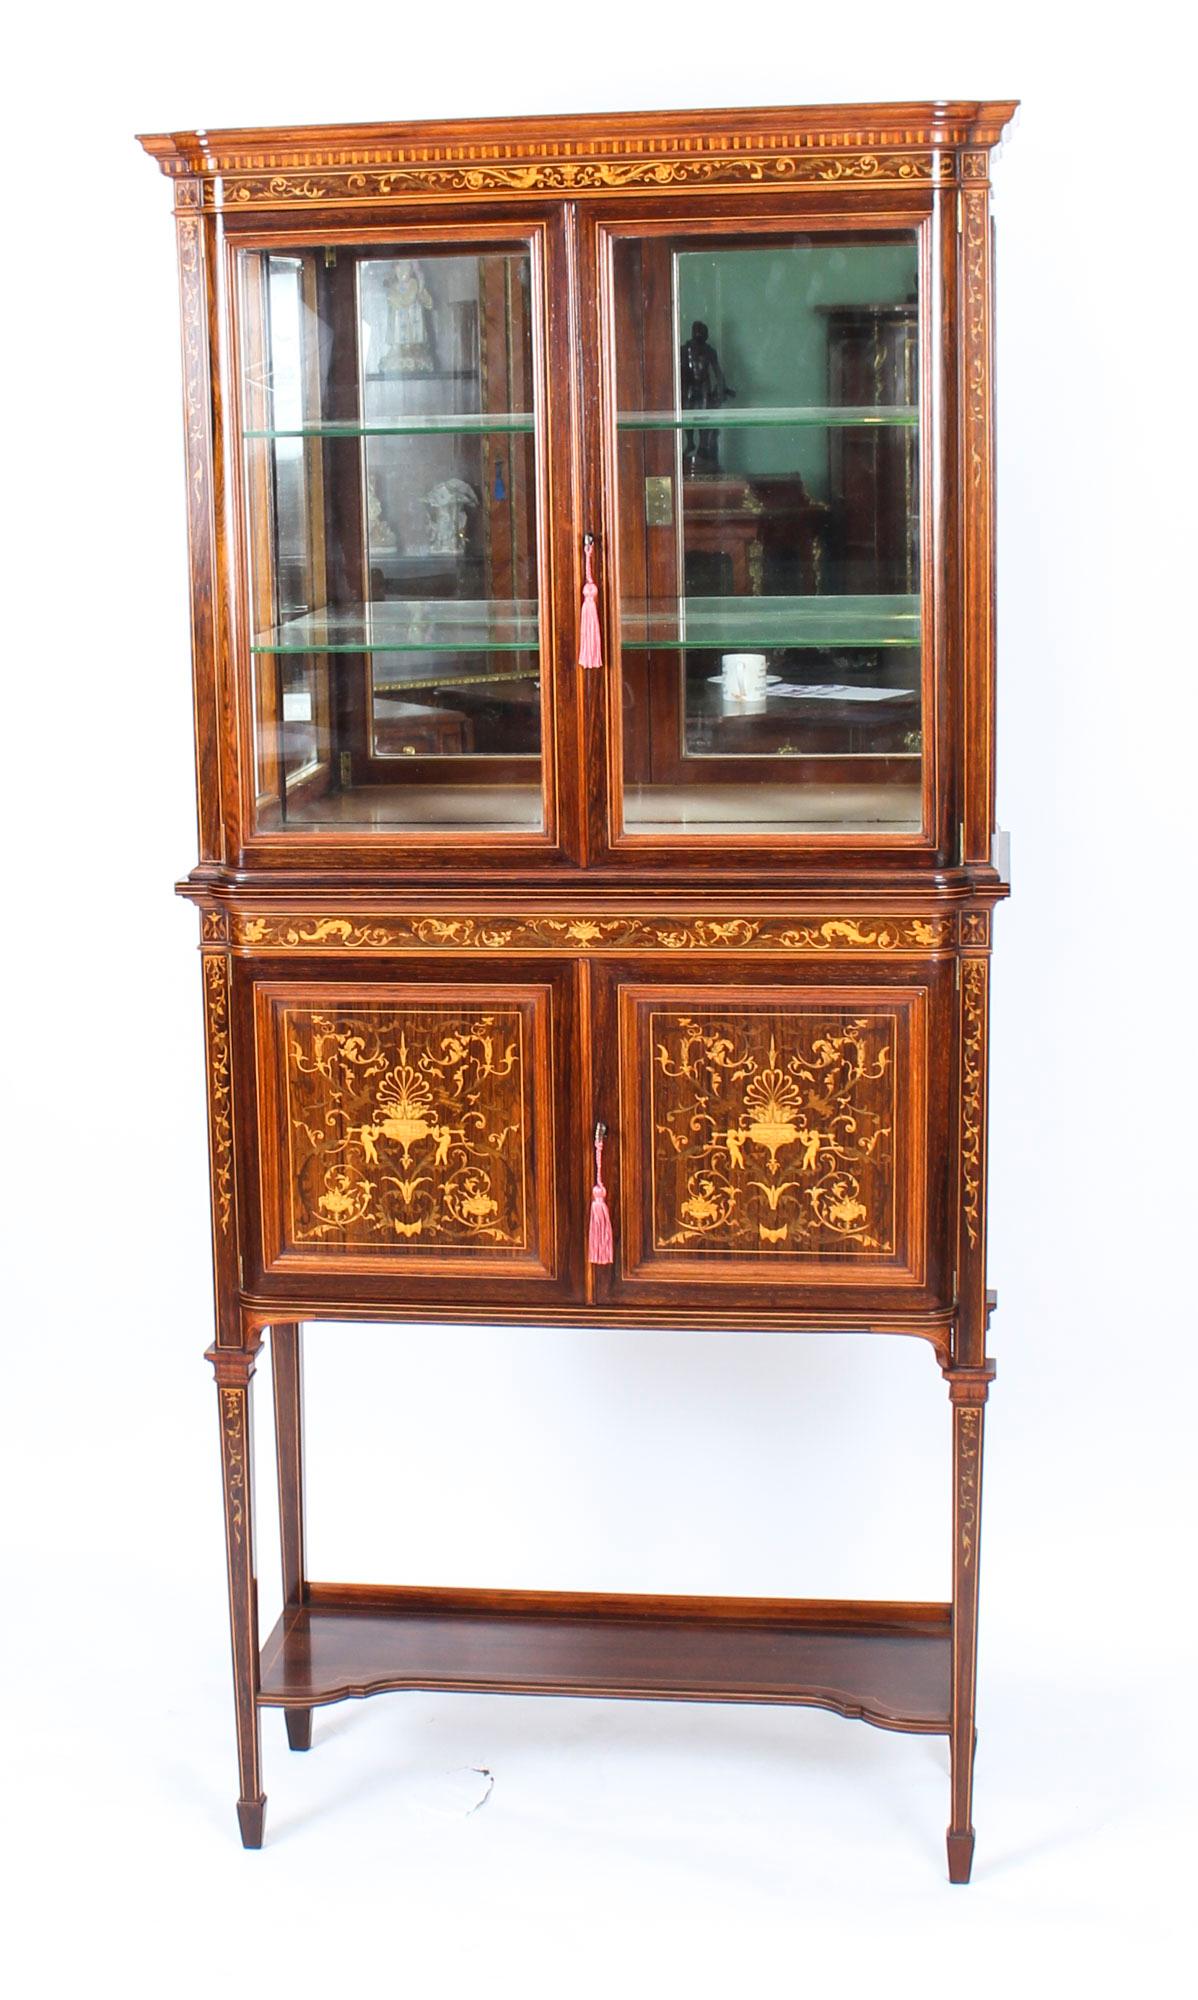 Antique Edwardian Inlaid Display Cabinet by Edwards & Roberts, 19th Century For Sale 4